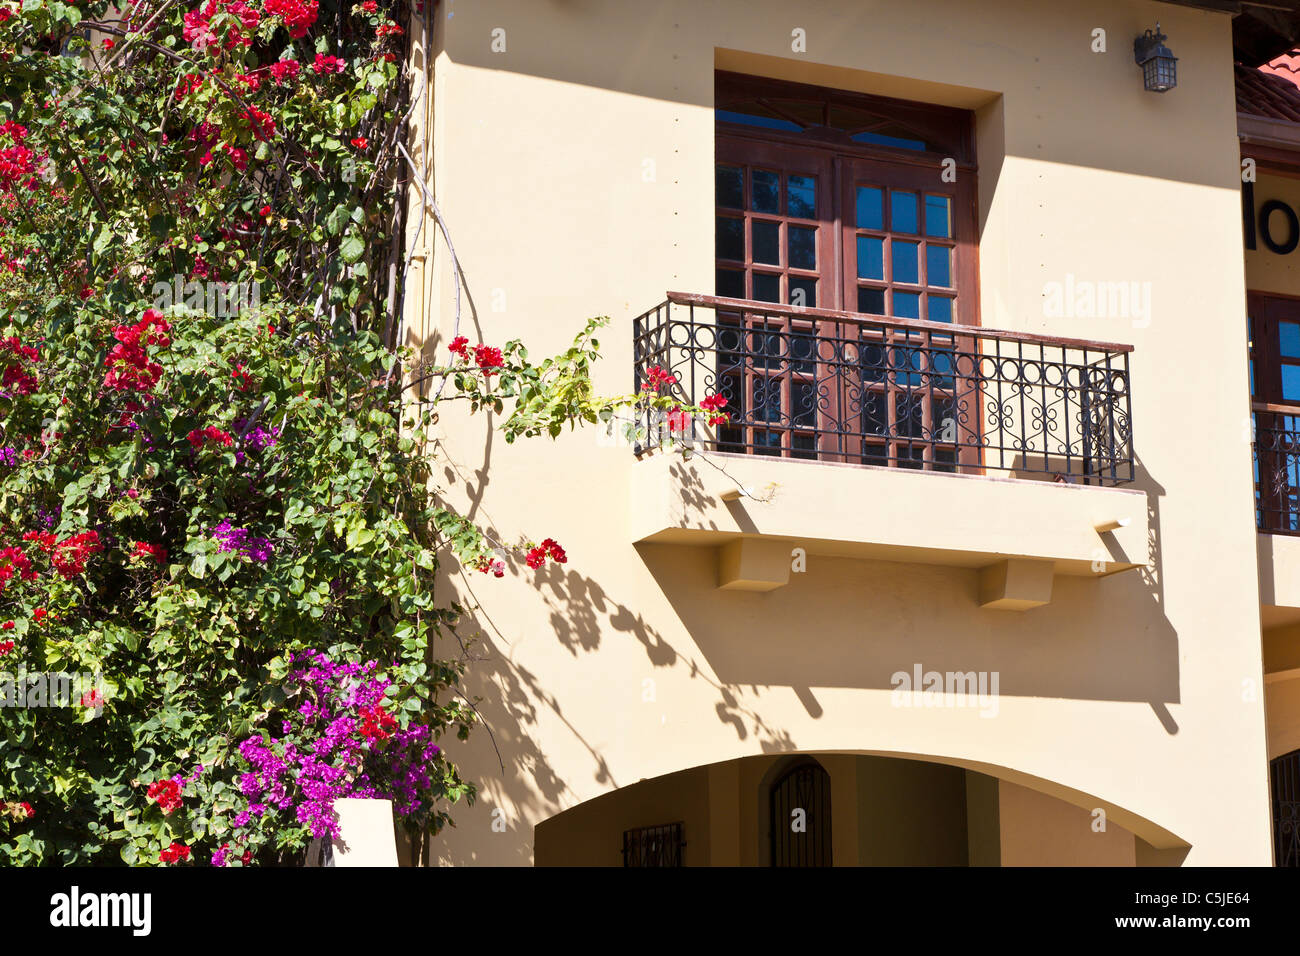 Bougainvillea climbs the wall next to a balcony with French doors on a building in Belize City, Belize Stock Photo